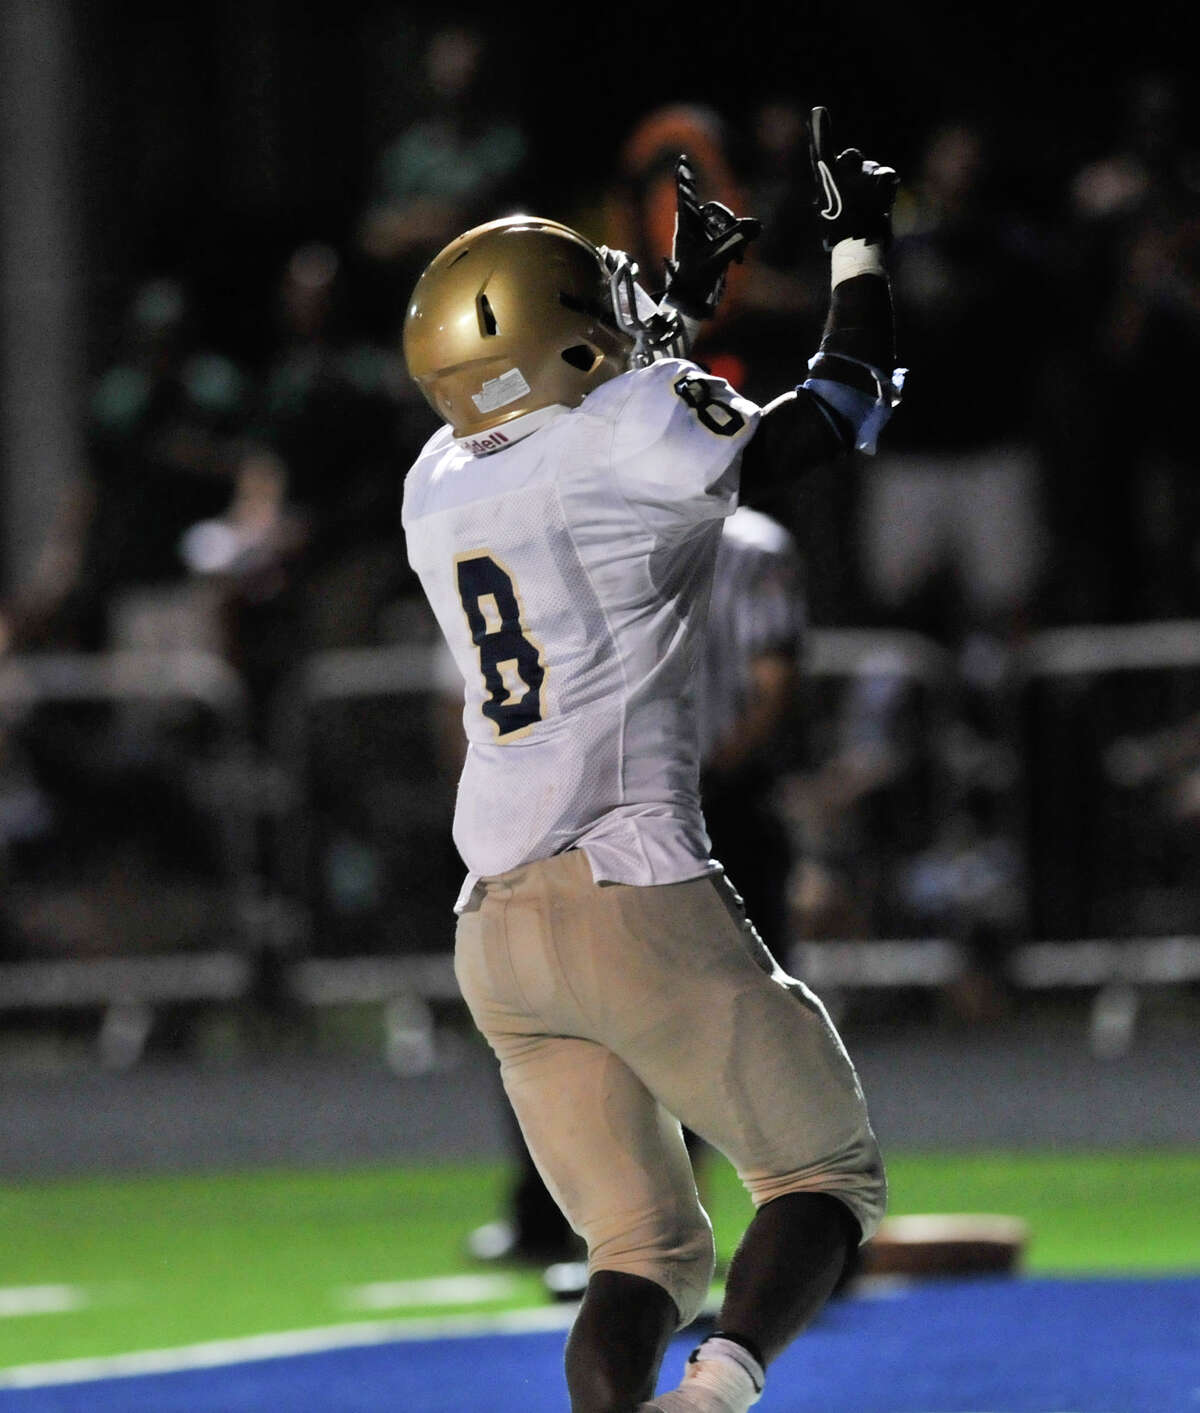 Kyron Davis of Holy Cross points to the sky after scoring a first half touchdown versus Central Catholic.